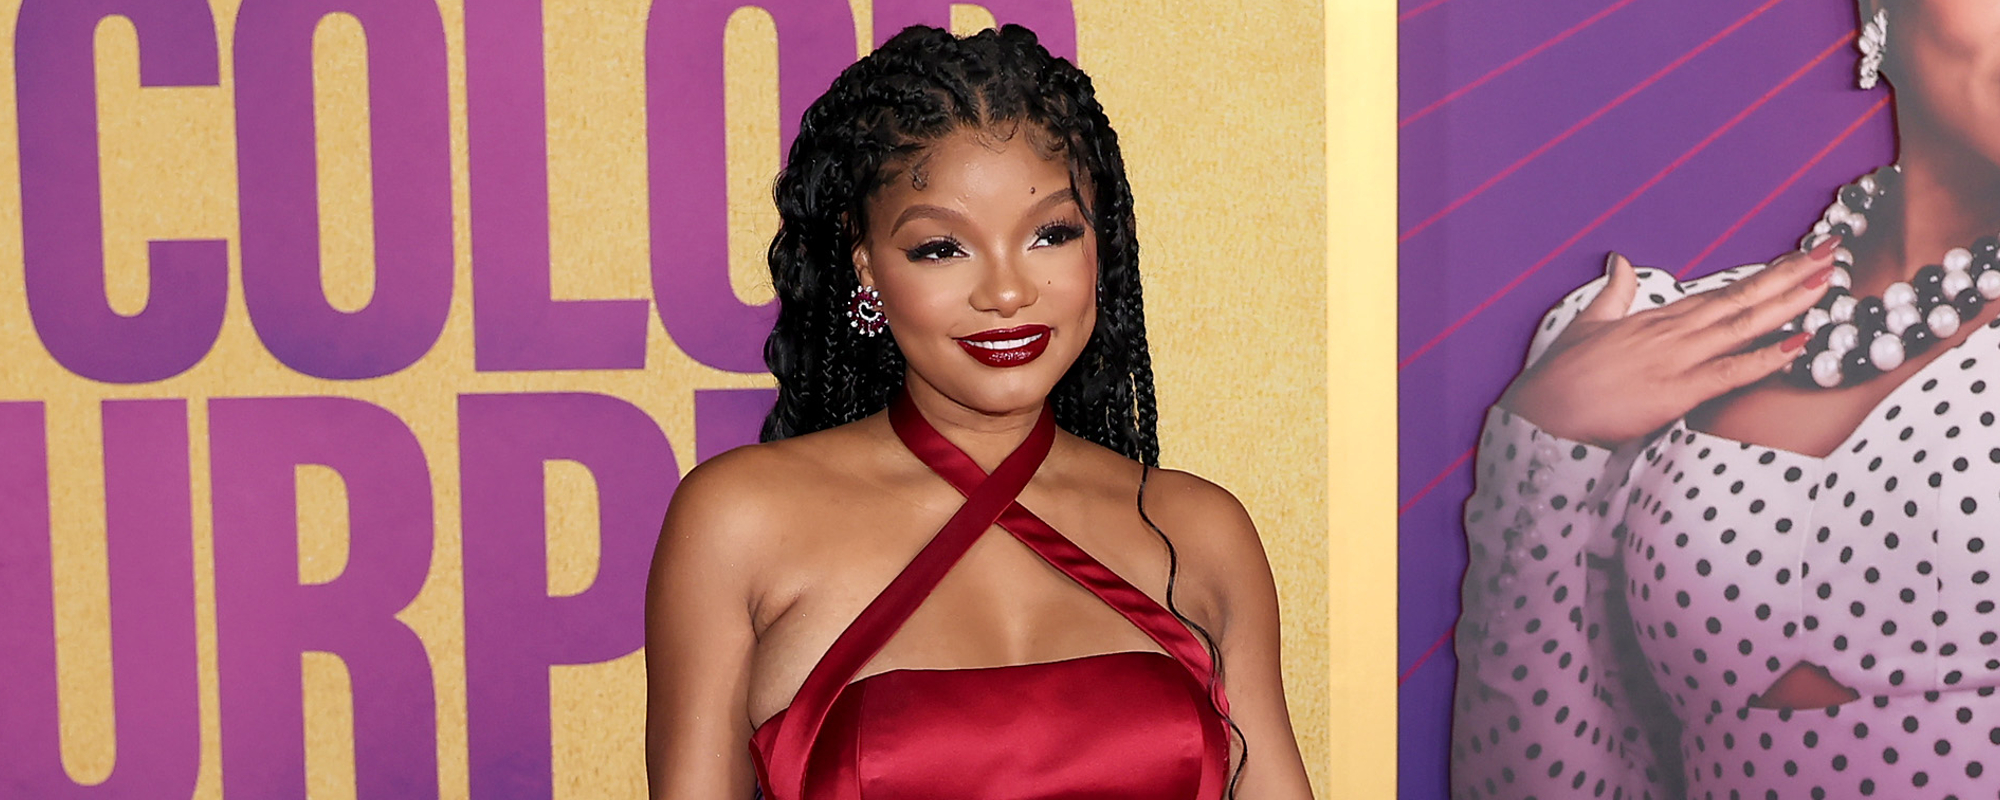 ‘Little Mermaid’ Star Halle Bailey Shares Heartwarming Photo of First Child: “The World Is Desperate to Know You”